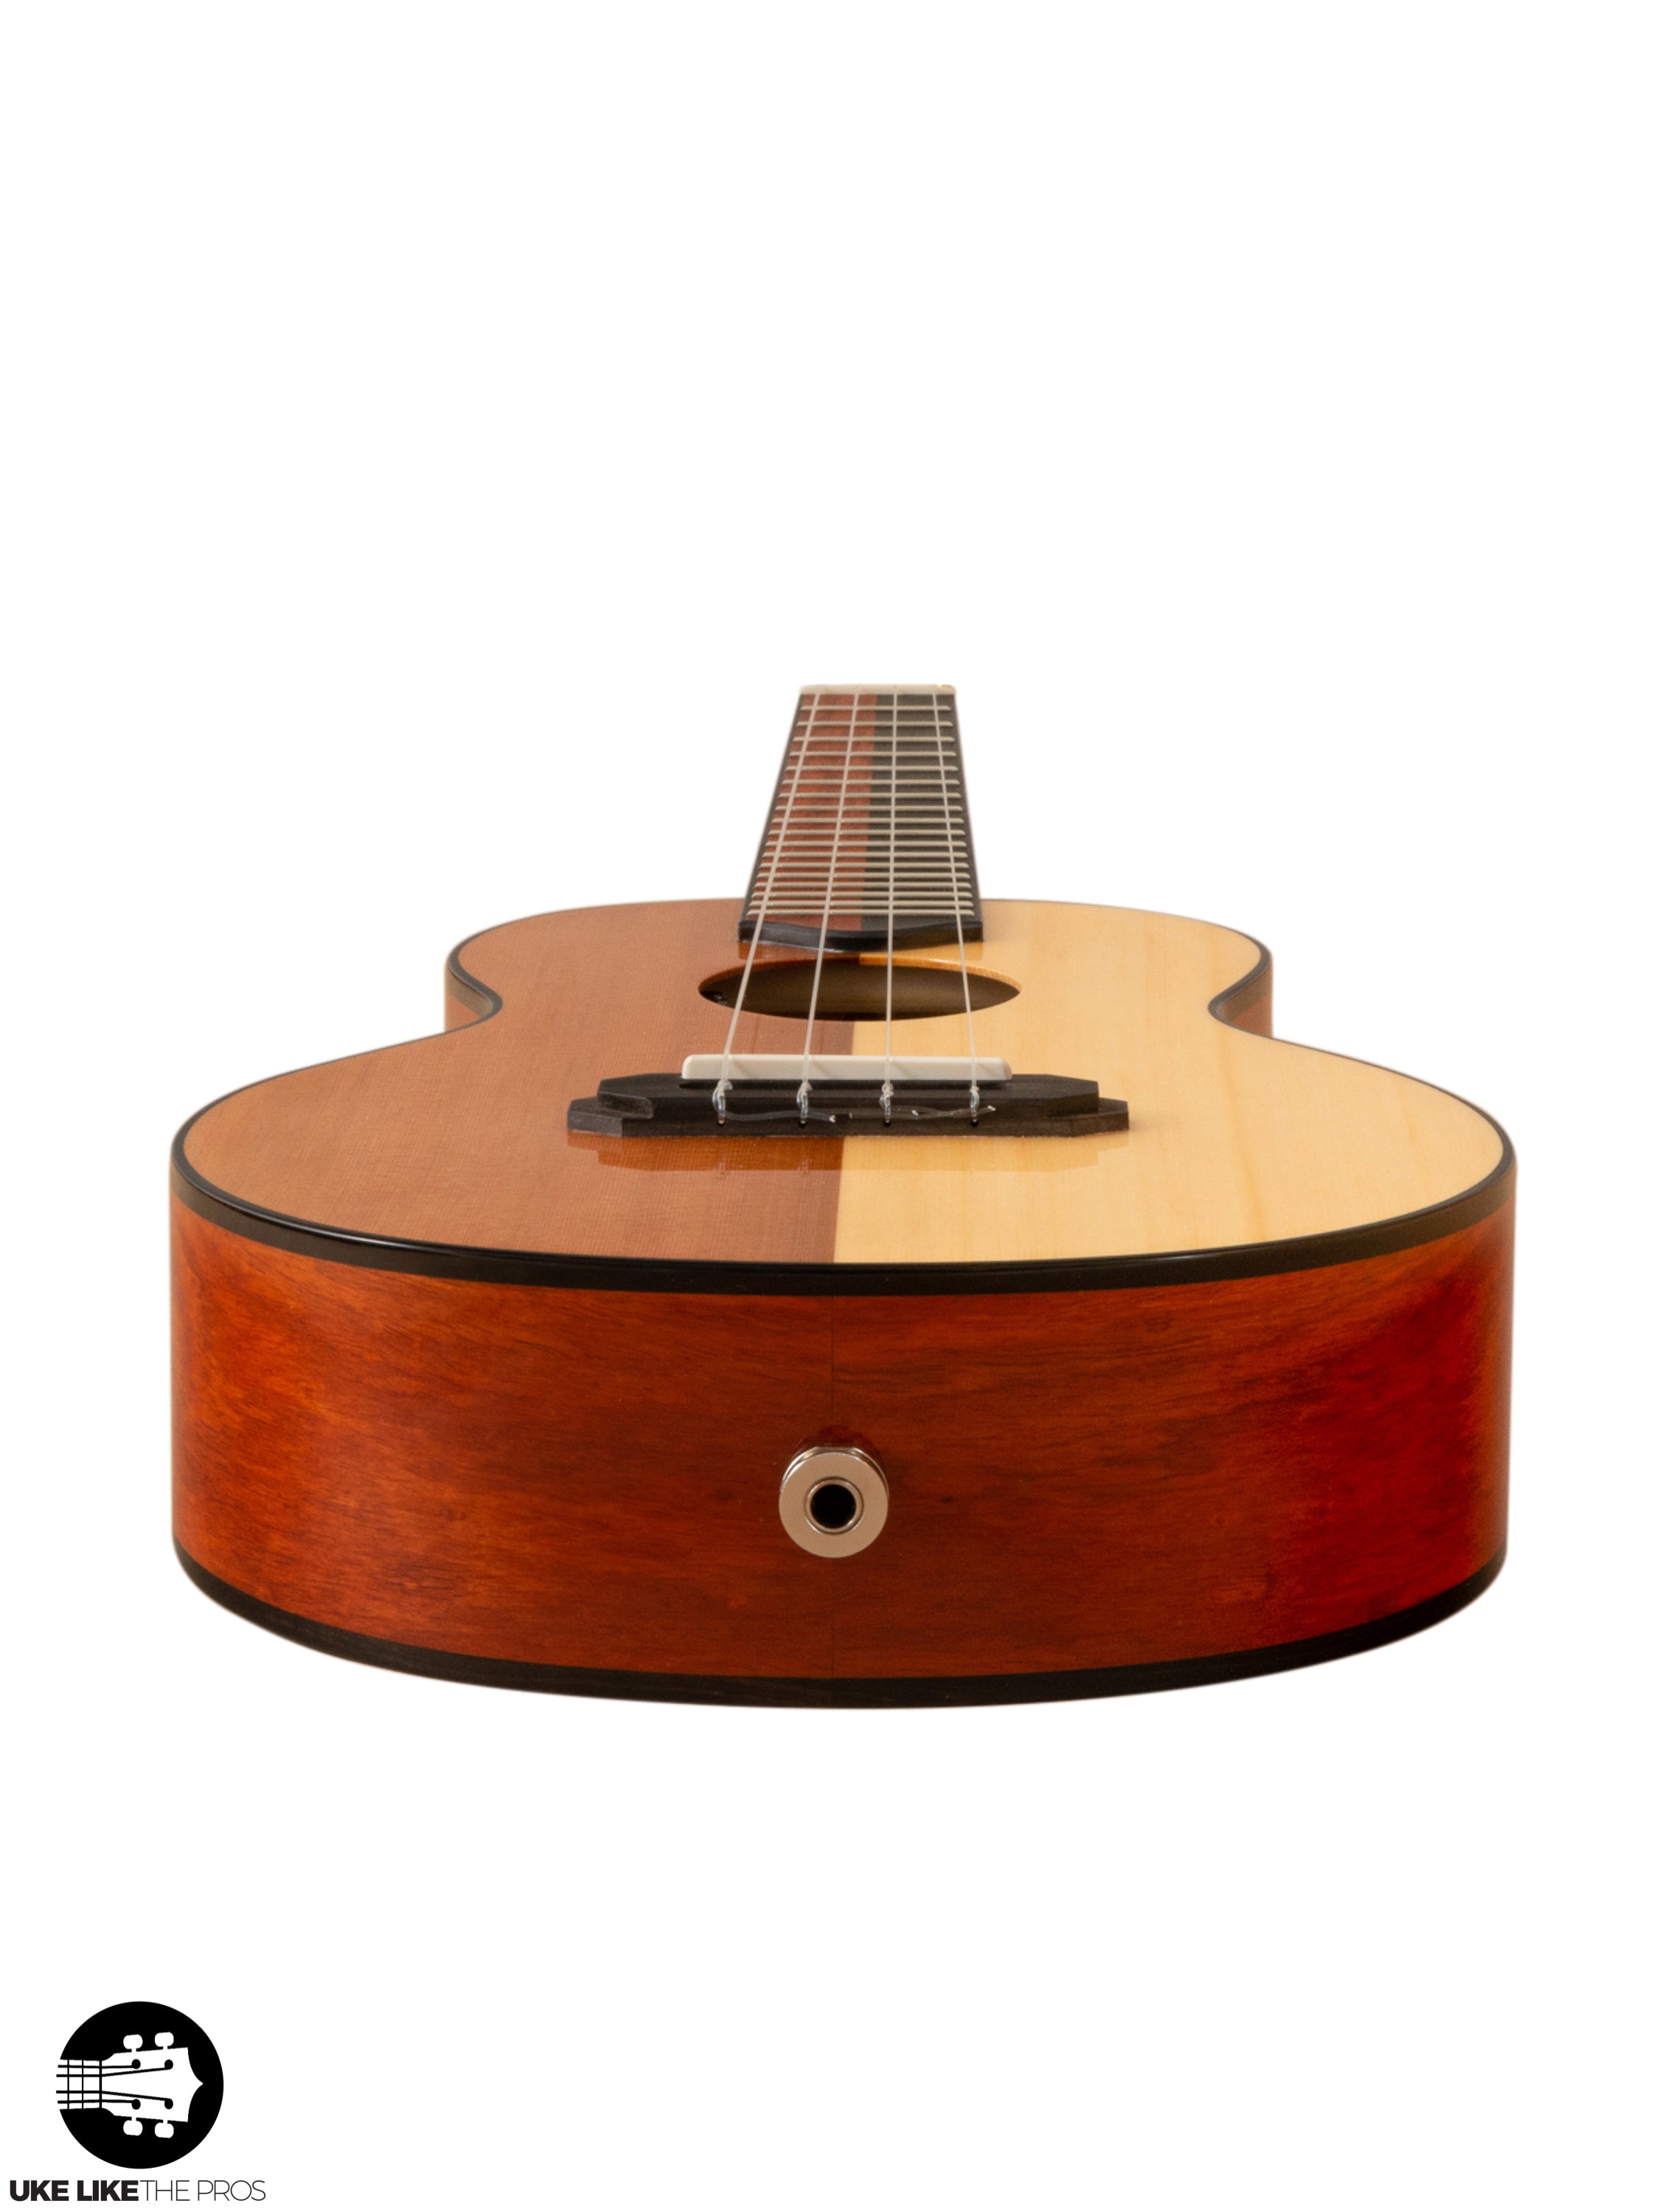 [DISCOUNTED] UPGRADED Rebel New Particle Tenor Ukulele Solid Cedar/Spruce "Aech" ONLY 10 MADE